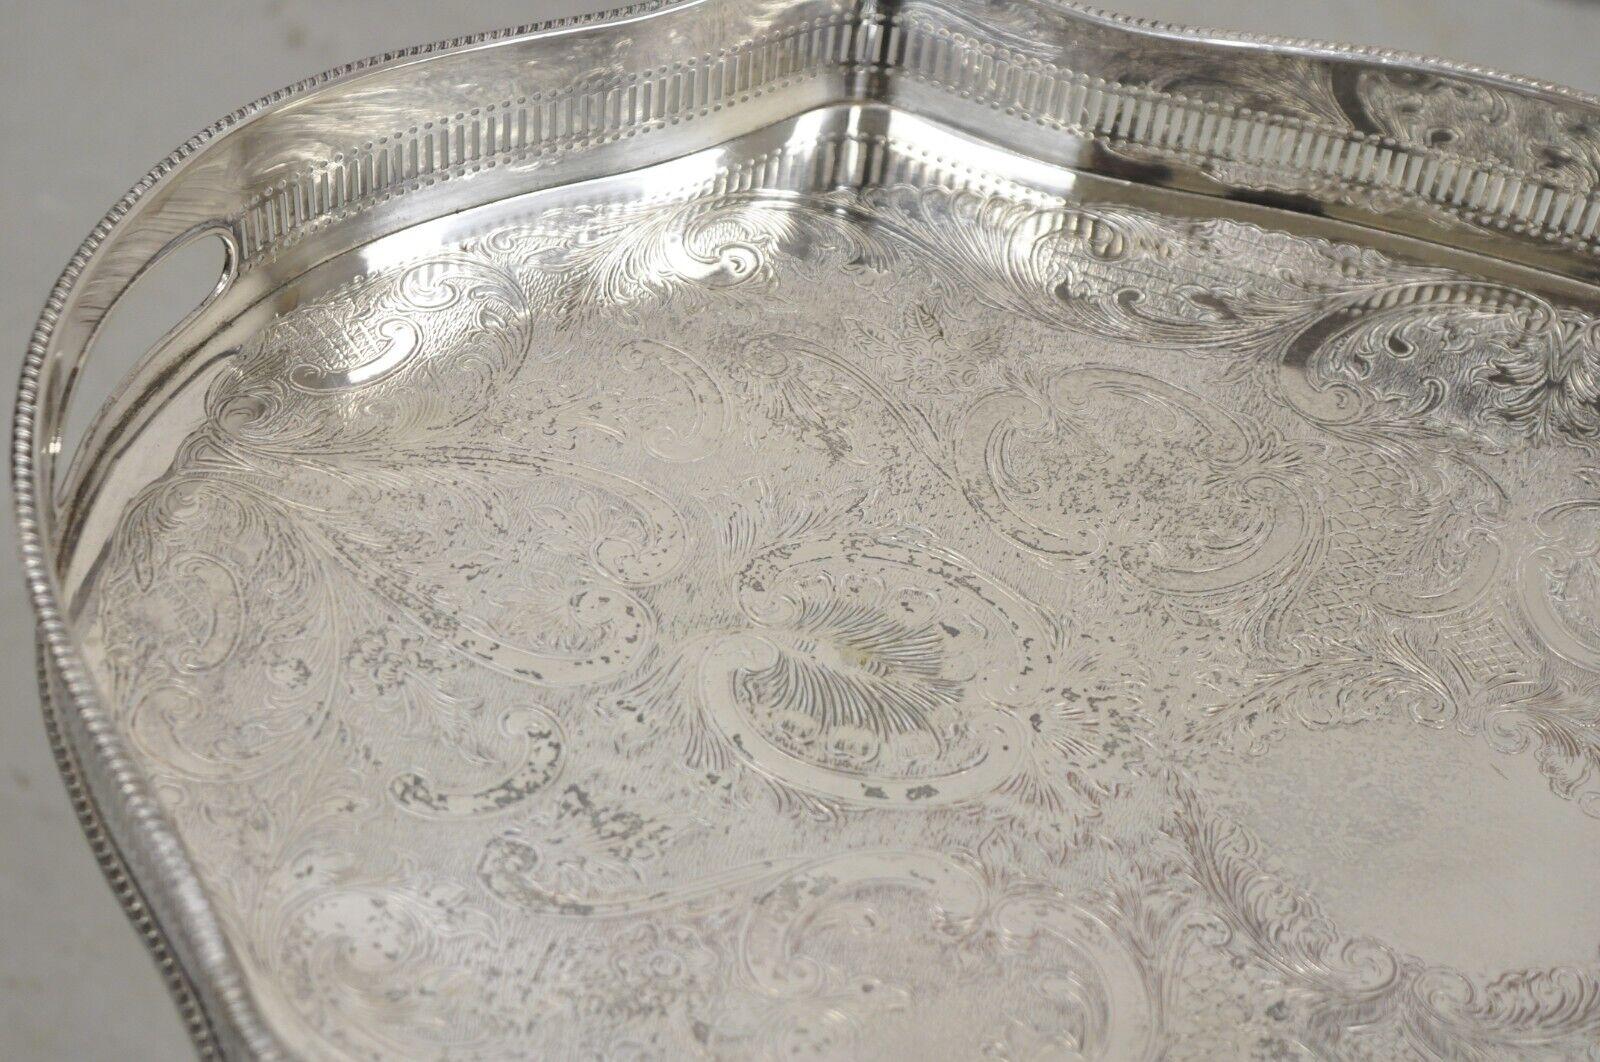 Vintage Victorian Silver Plated Pierced Gallery Scalloped Serving Platter Tray 3